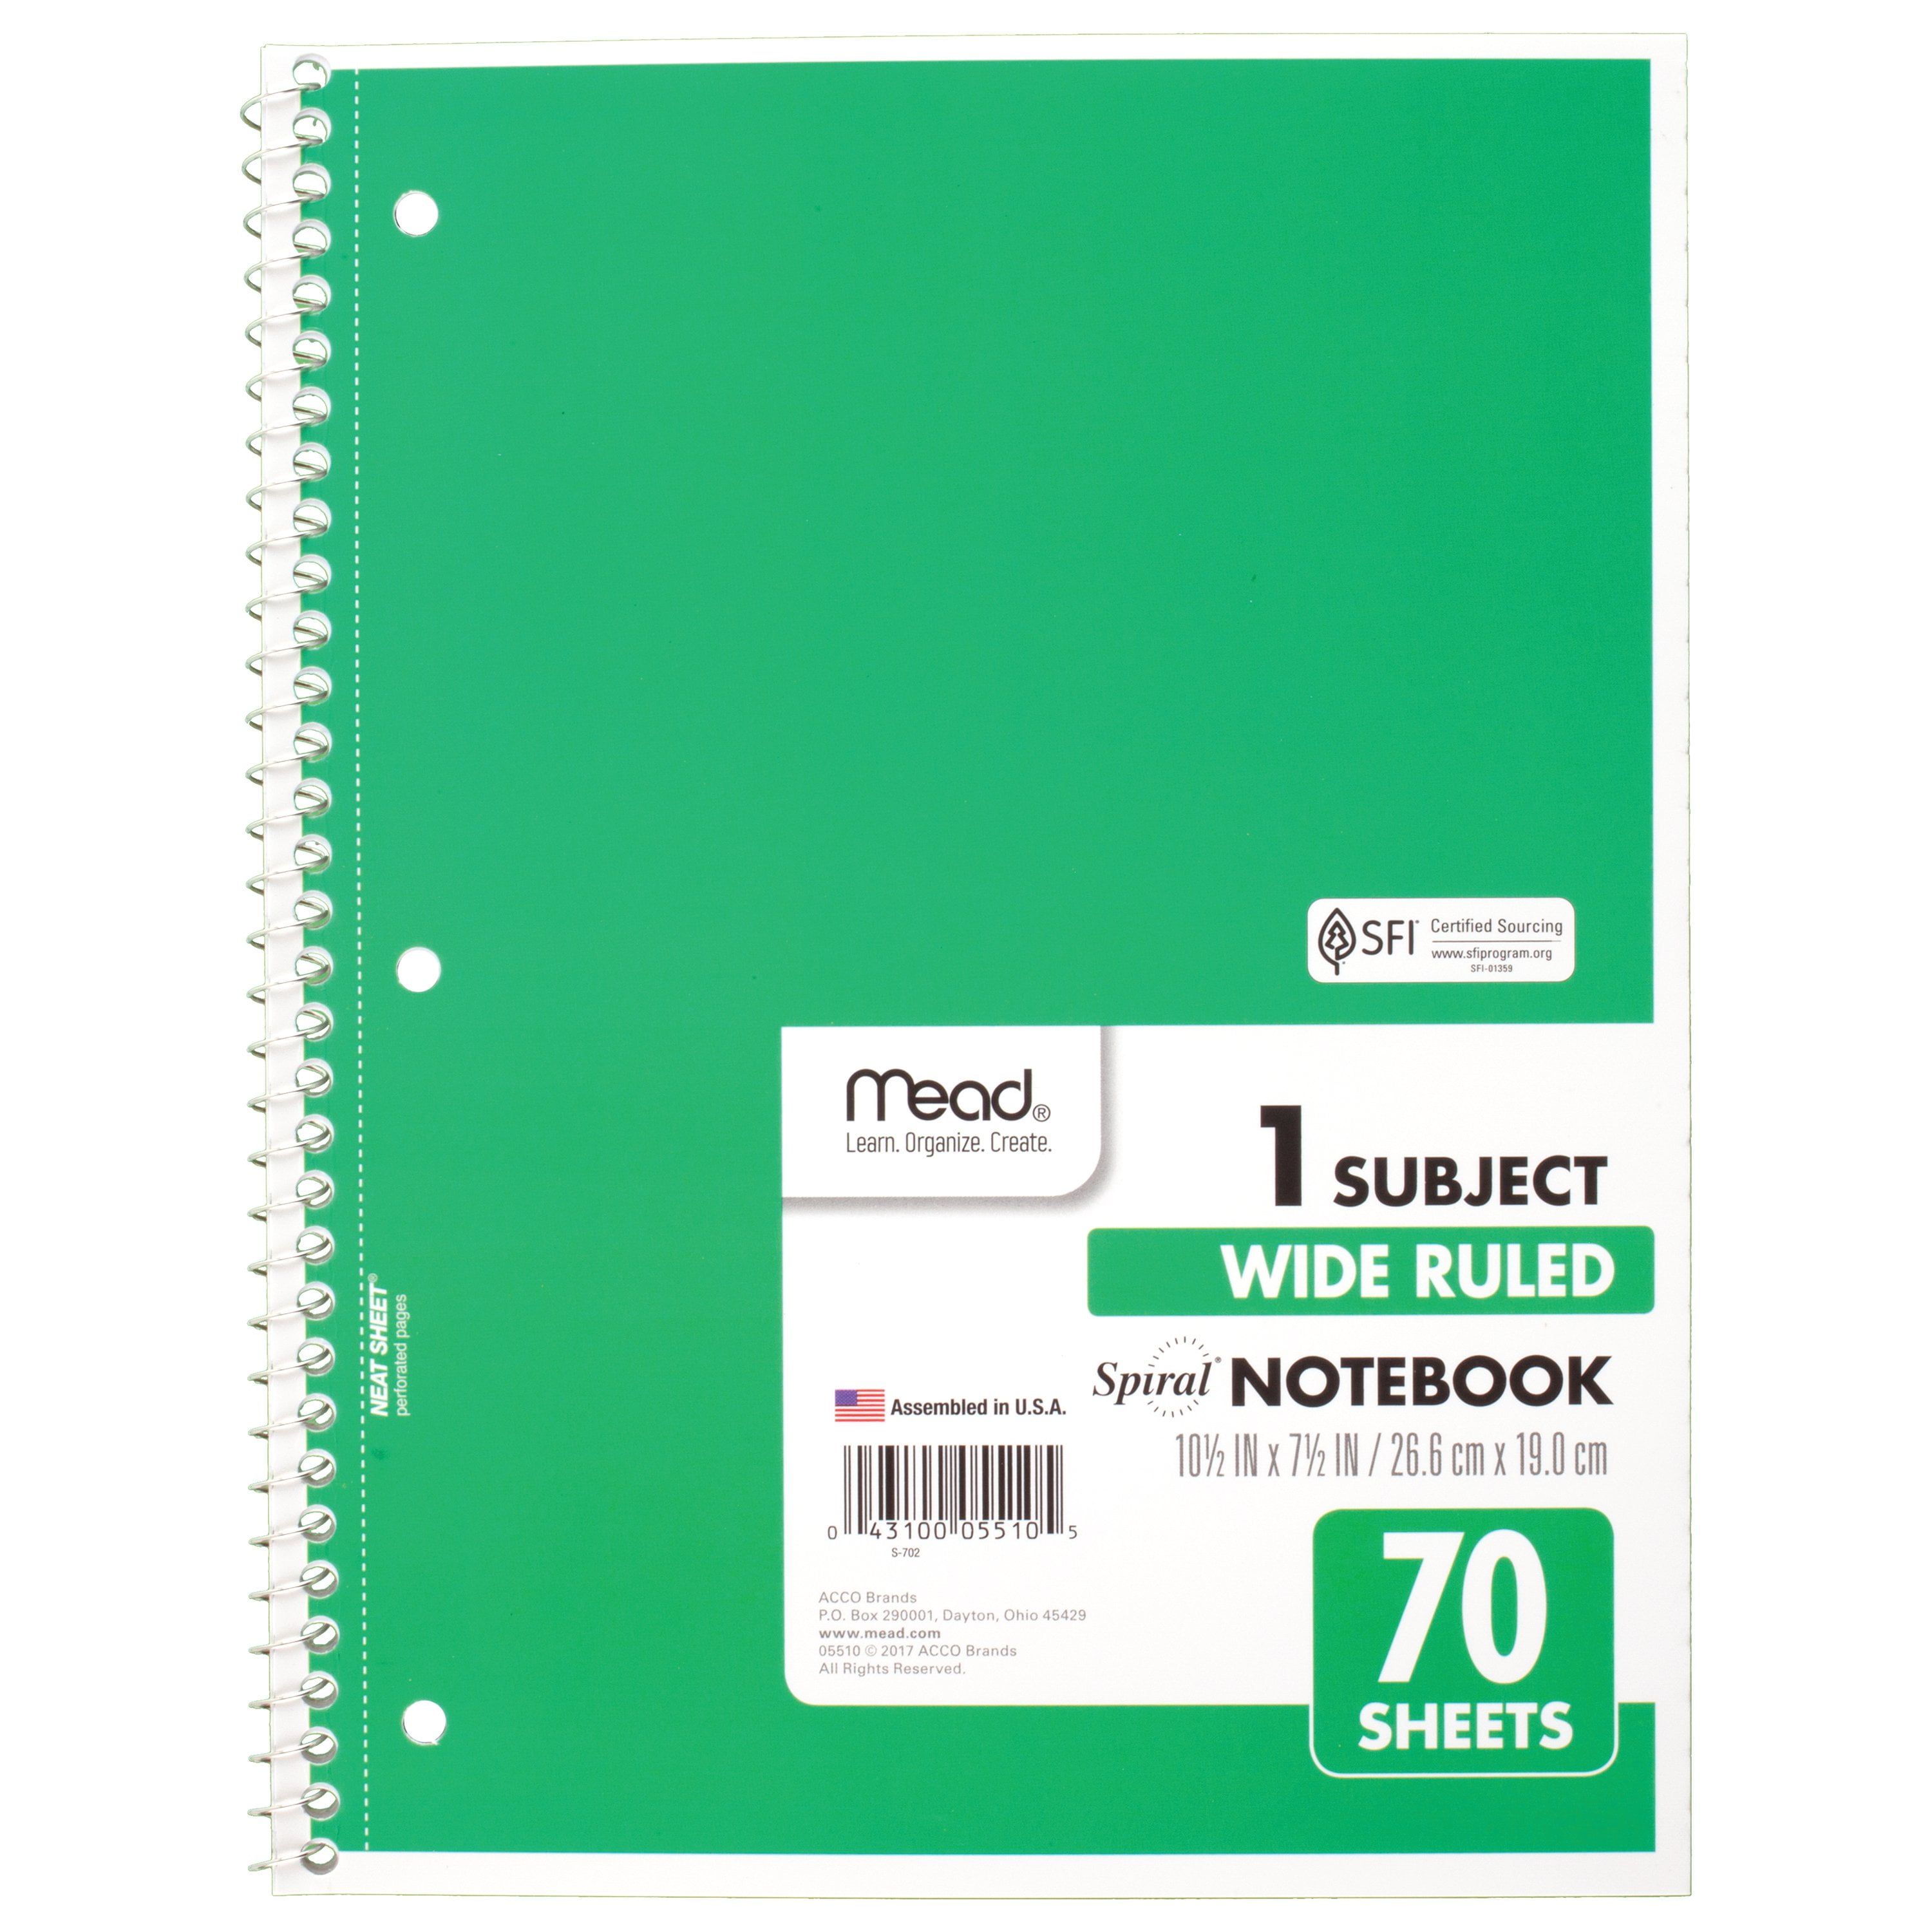 1 Notebook Single Subject Spiral Notebook 70 Sheets Wide Ruled Mead 